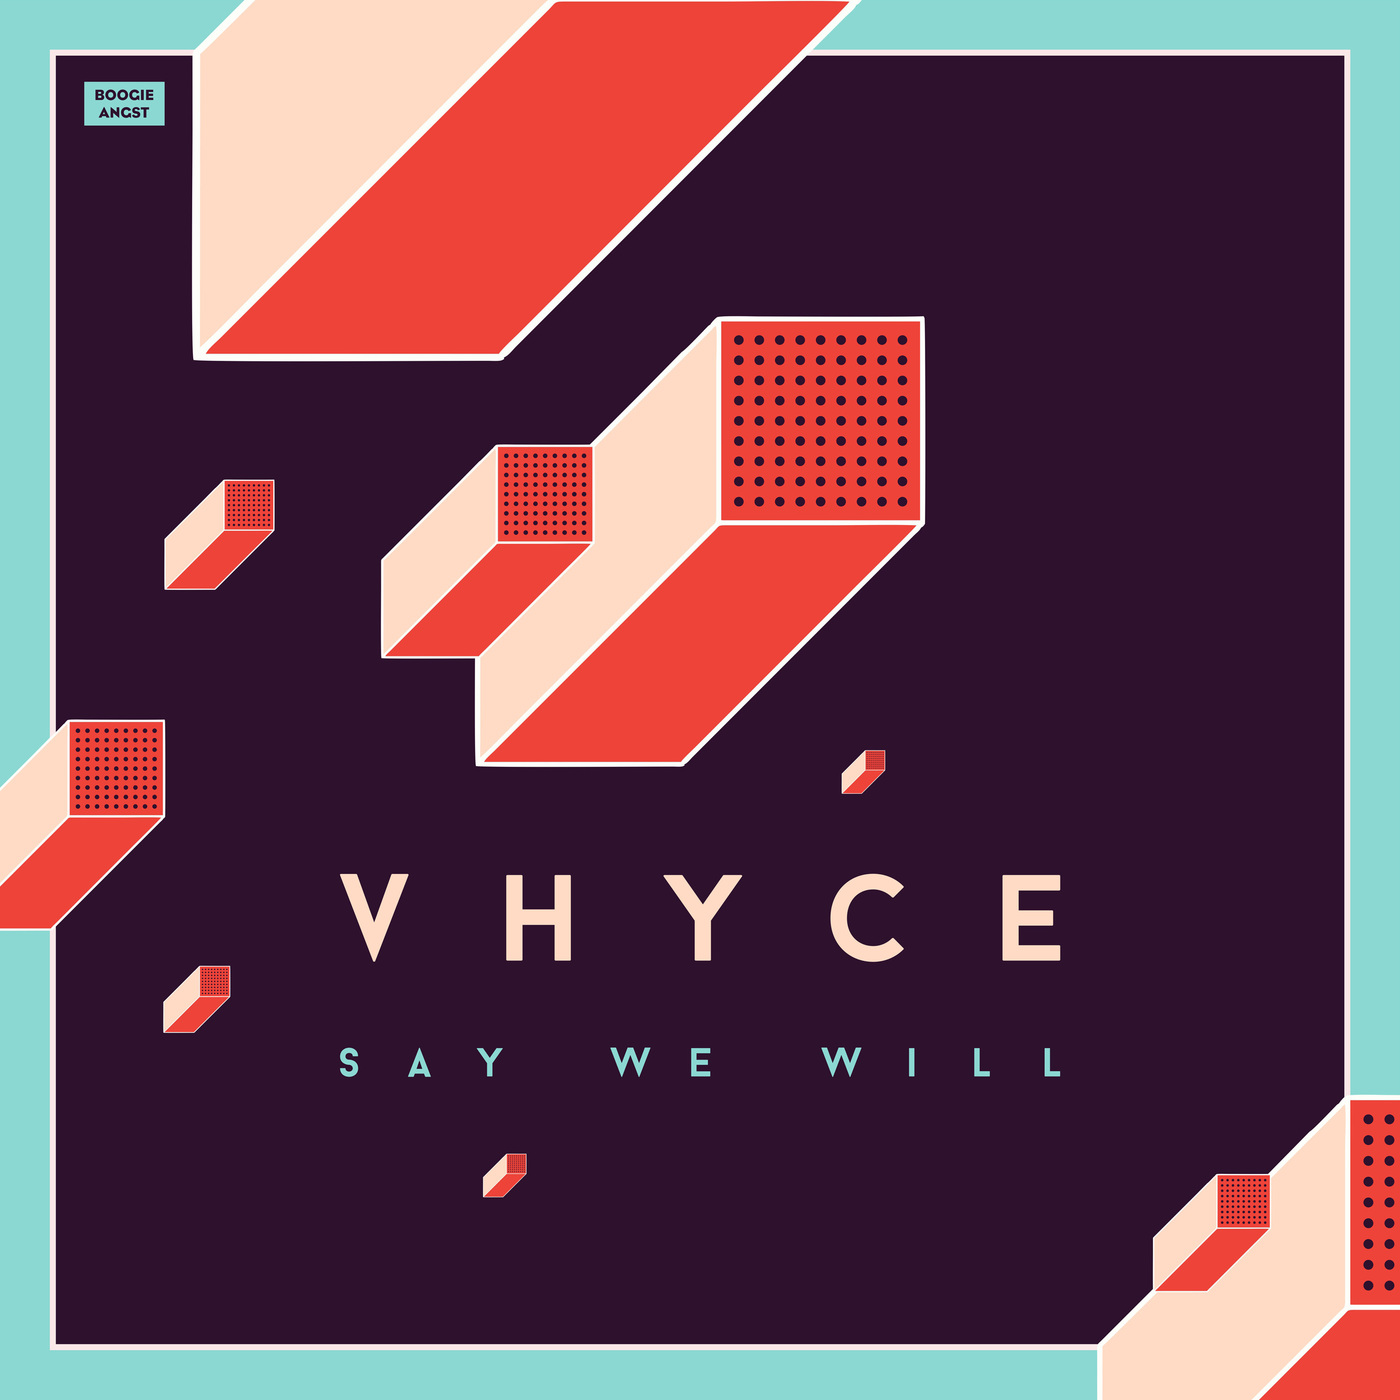 Vhyce - Say We Will / Boogie Angst